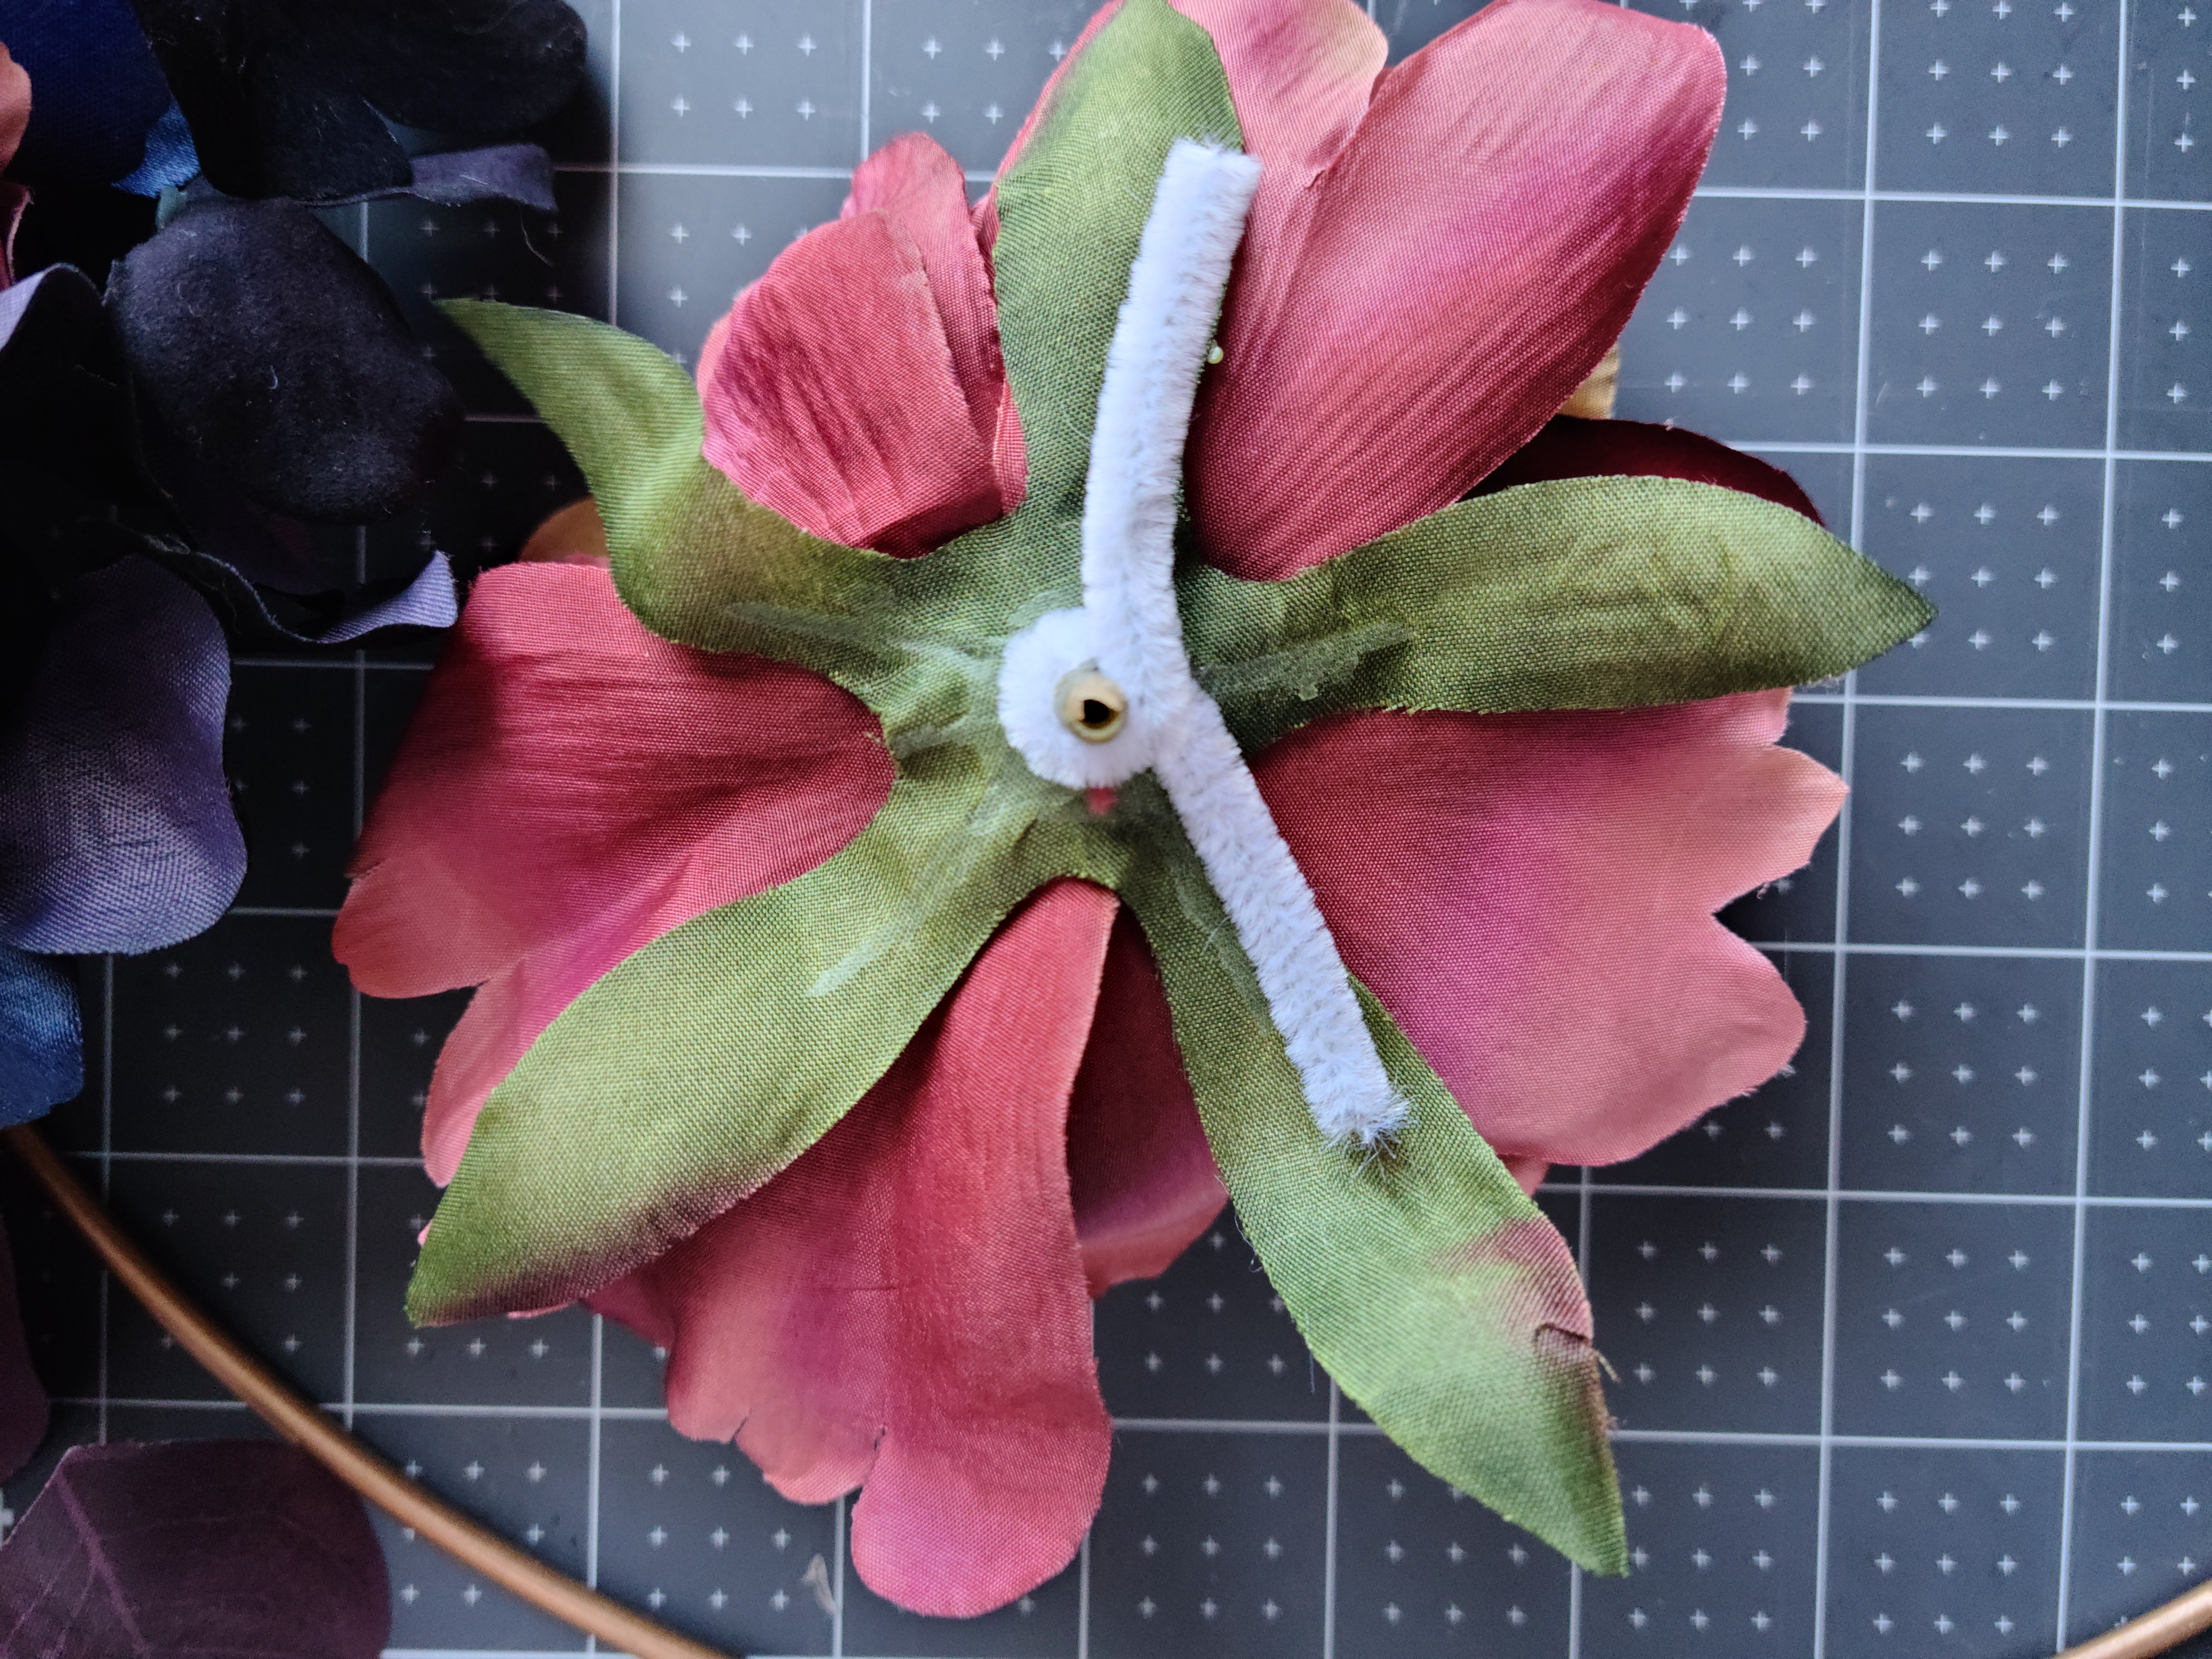 Placing the pipe cleaner on the hot glue on the burgundy flower.